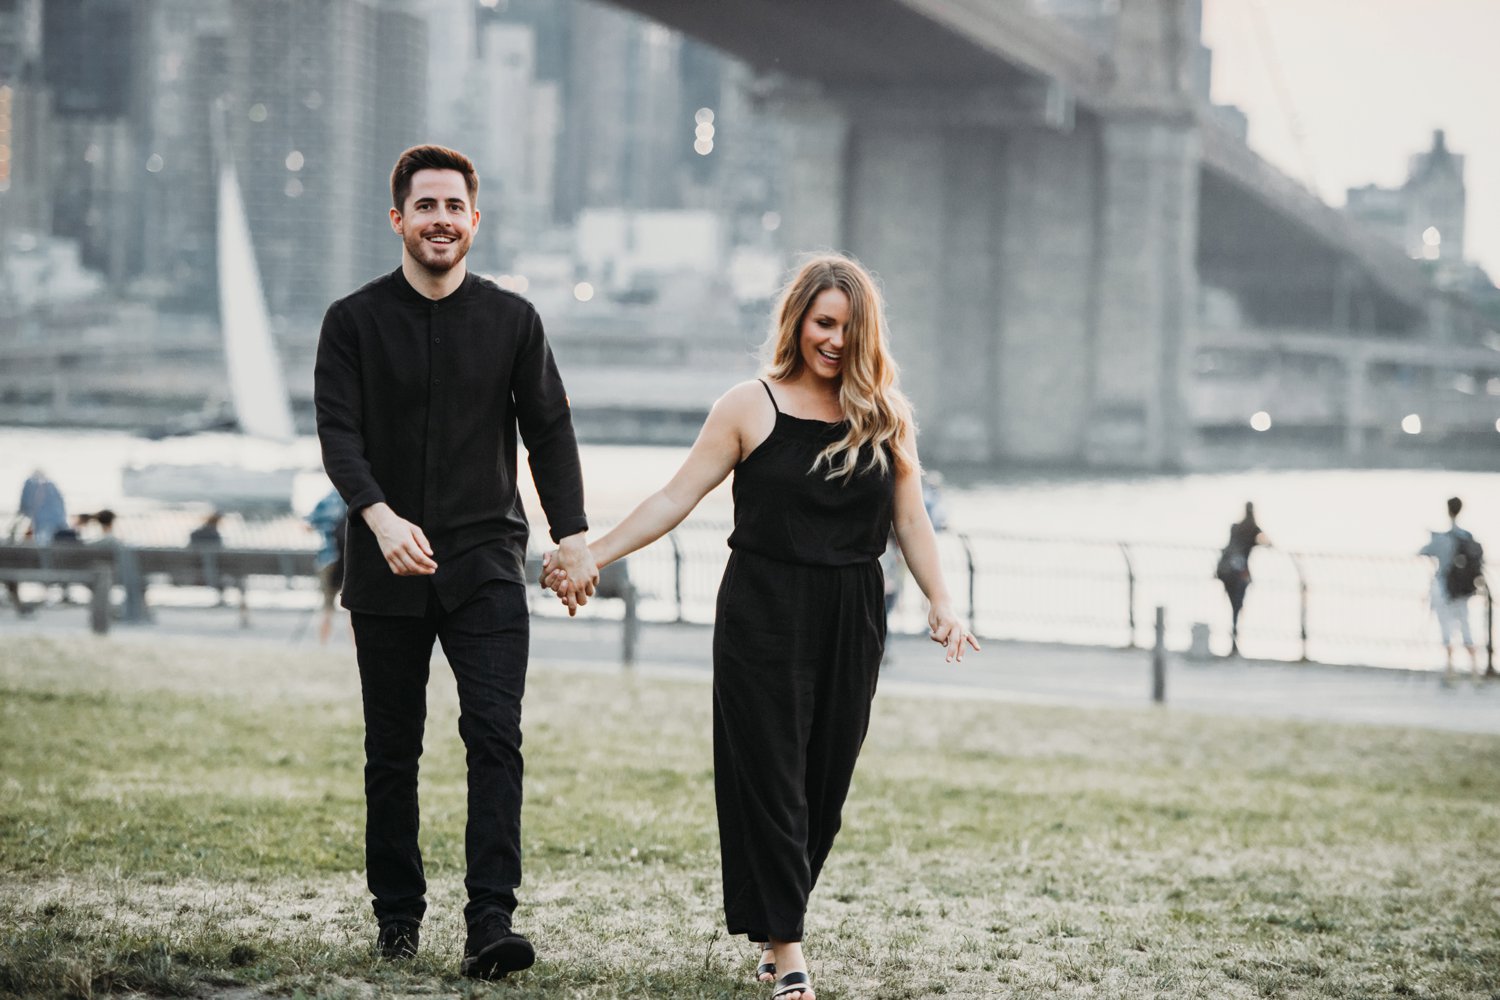  images by feliciathephotographer.com | destination wedding photographer | new york city | brooklyn bridge | proposal | engagement | whimsical | romantic | true love | she said yes | casual | hand in hand | 